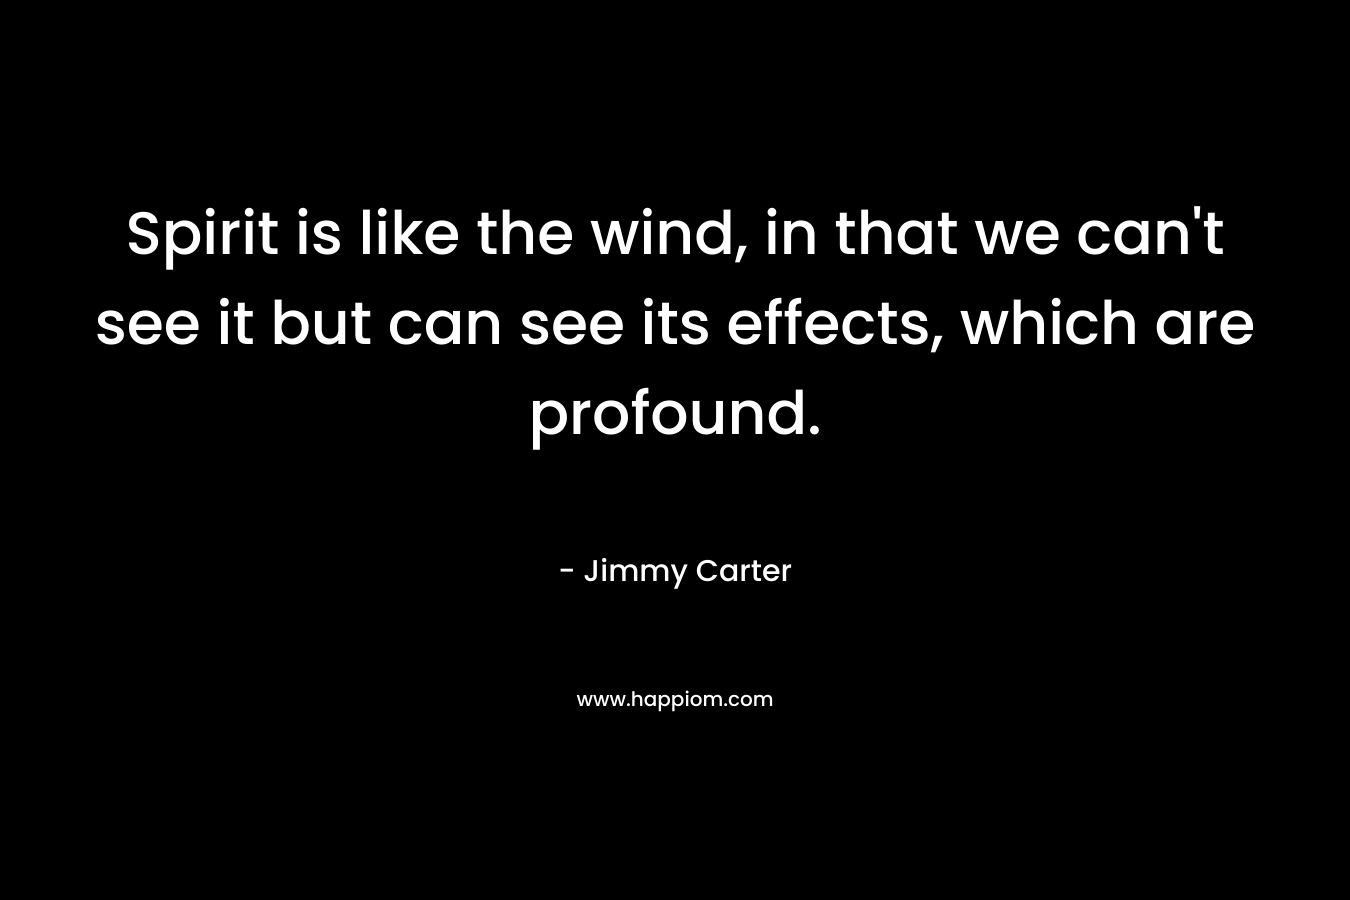 Spirit is like the wind, in that we can't see it but can see its effects, which are profound.